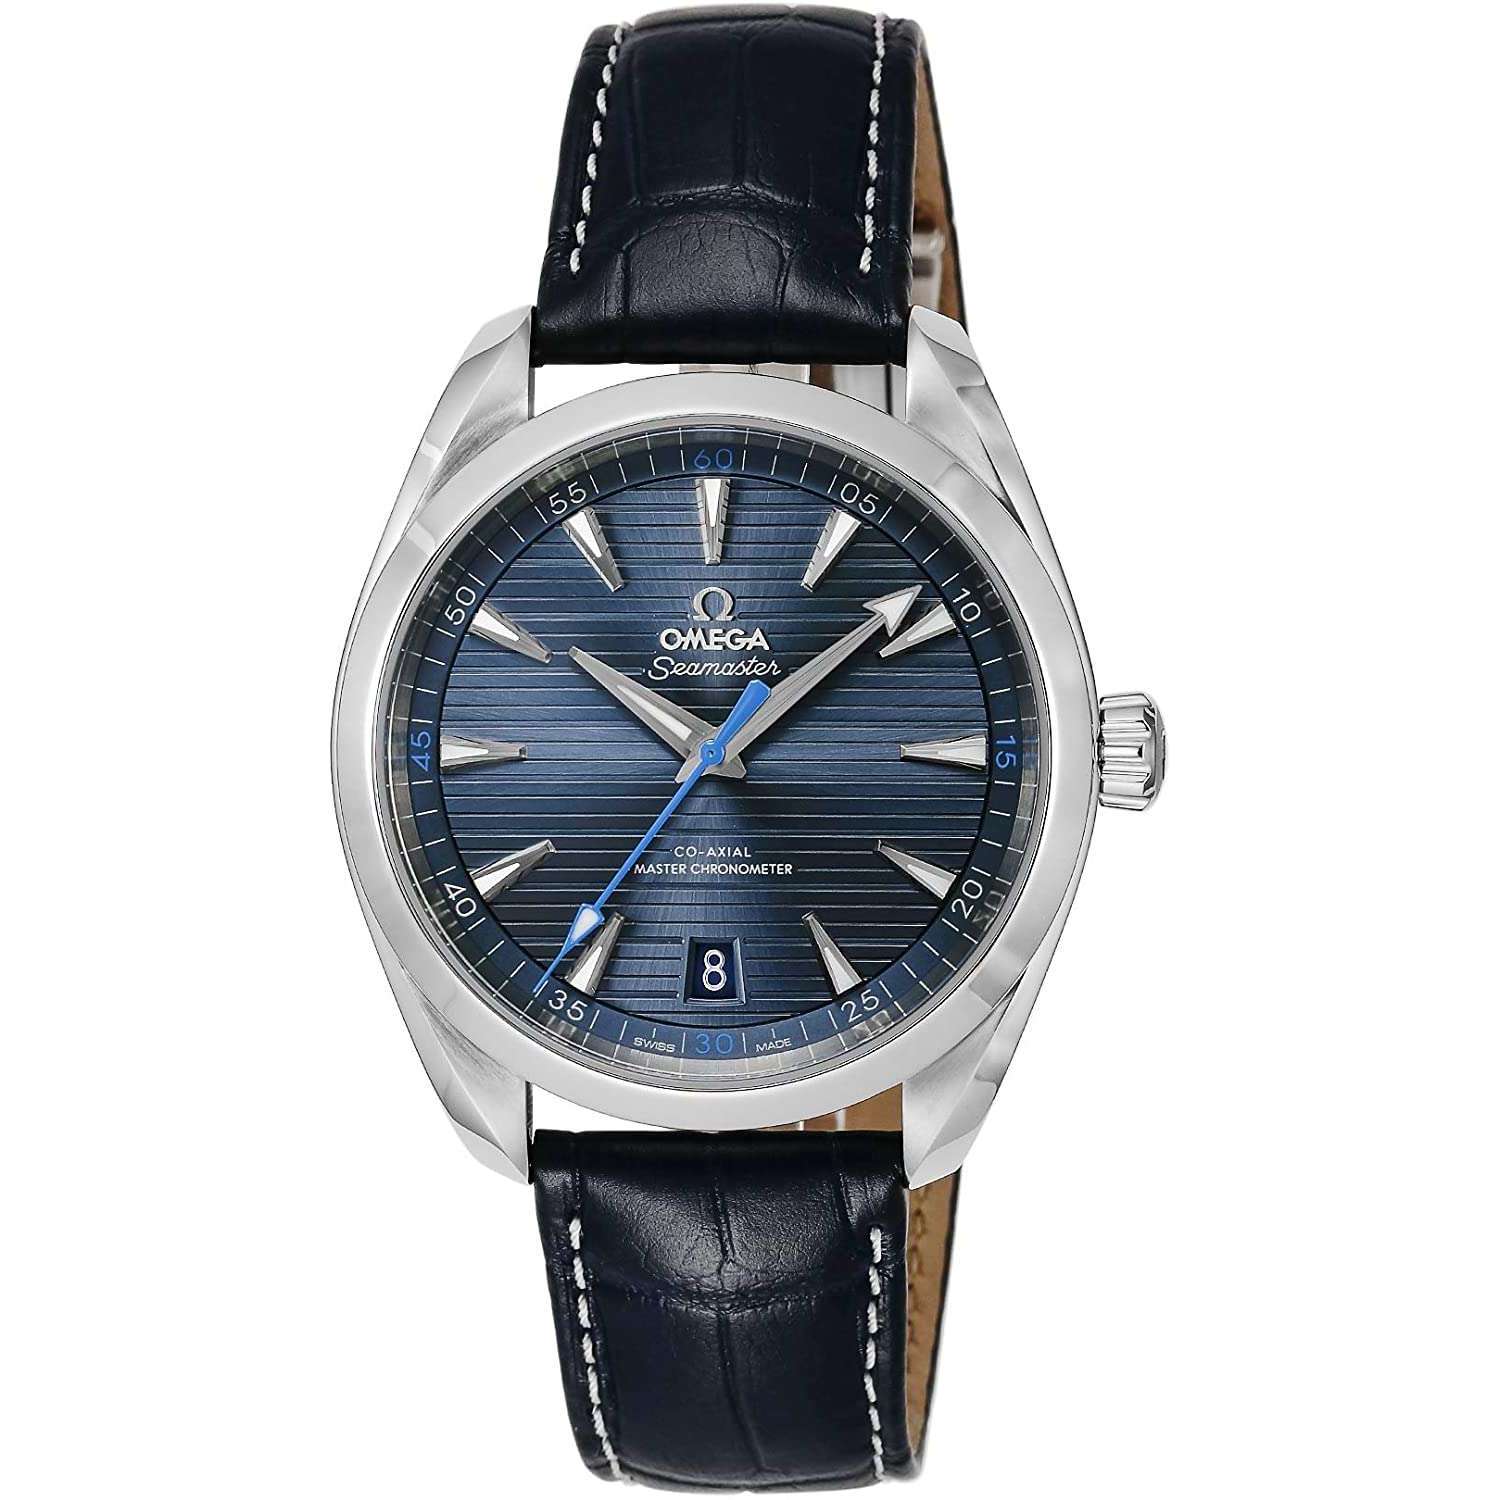 ROOK JAPAN:OMEGA SEAMASTER CO-AXIAL MASTER CHRONOMETER 40 MM MEN WATCH 220.13.41.21.03.002,Luxury Watch,Omega